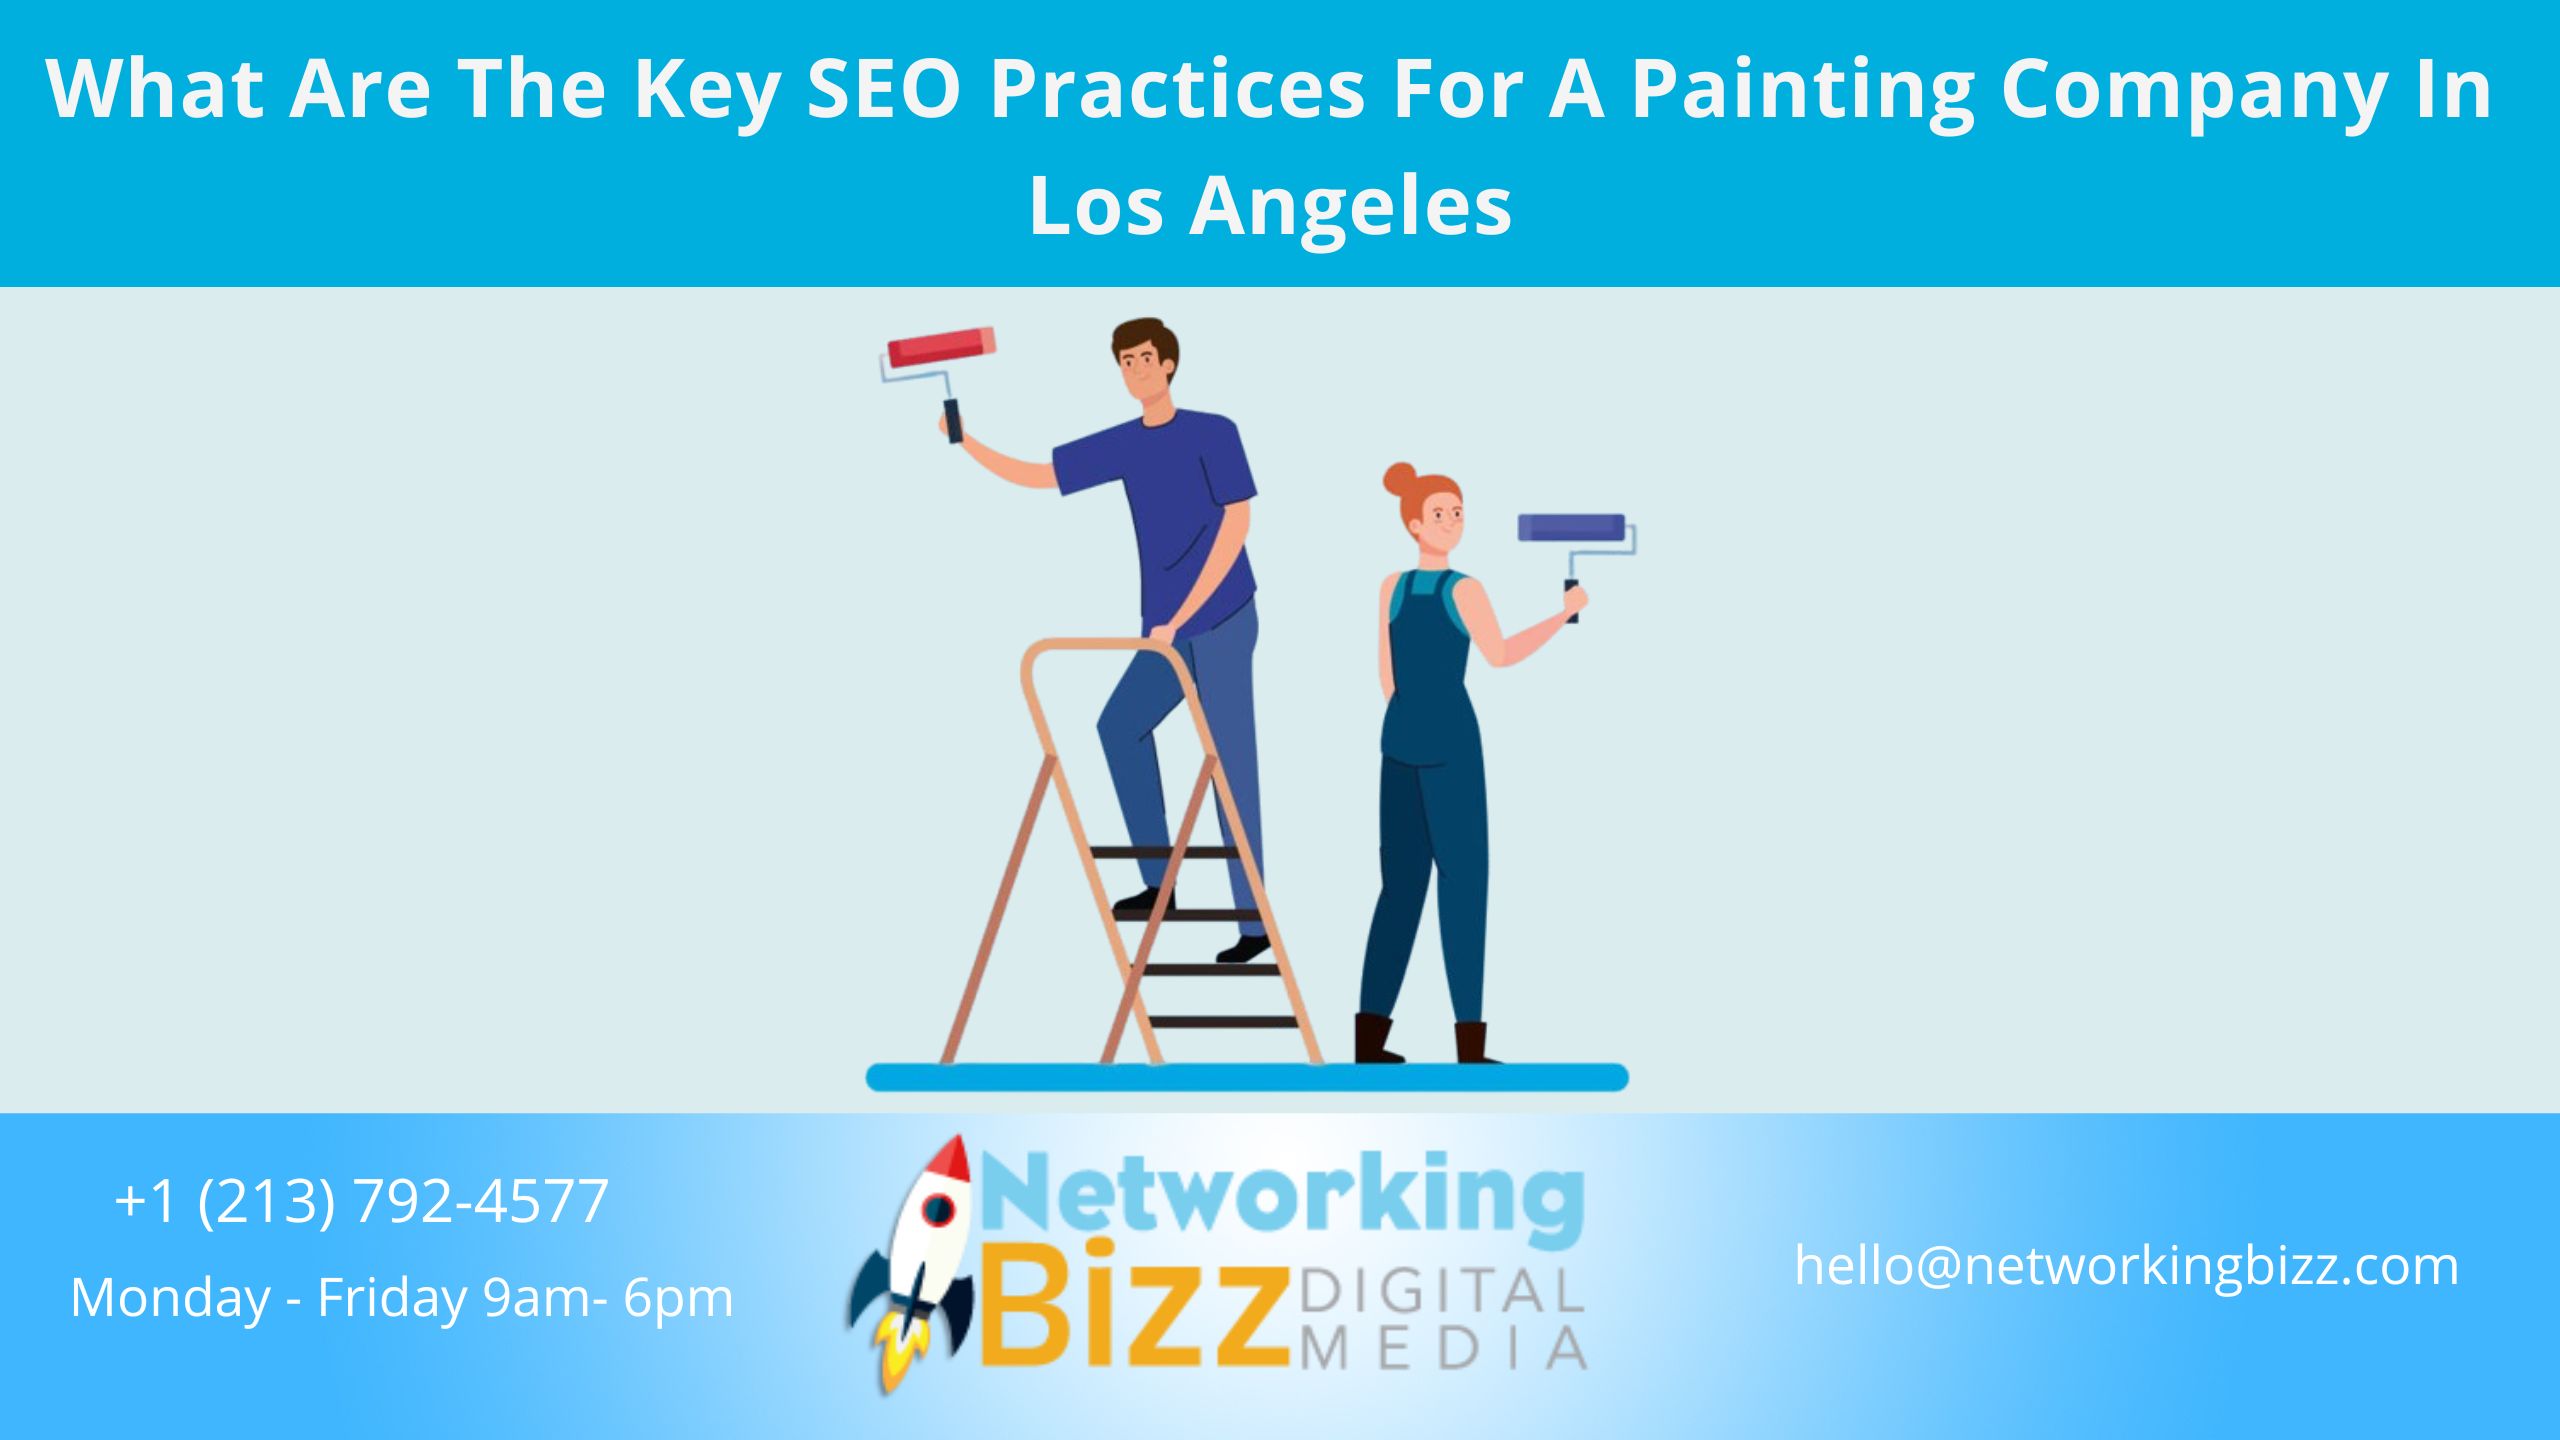 What Are The Key SEO Practices For A Painting Company In Los Angeles